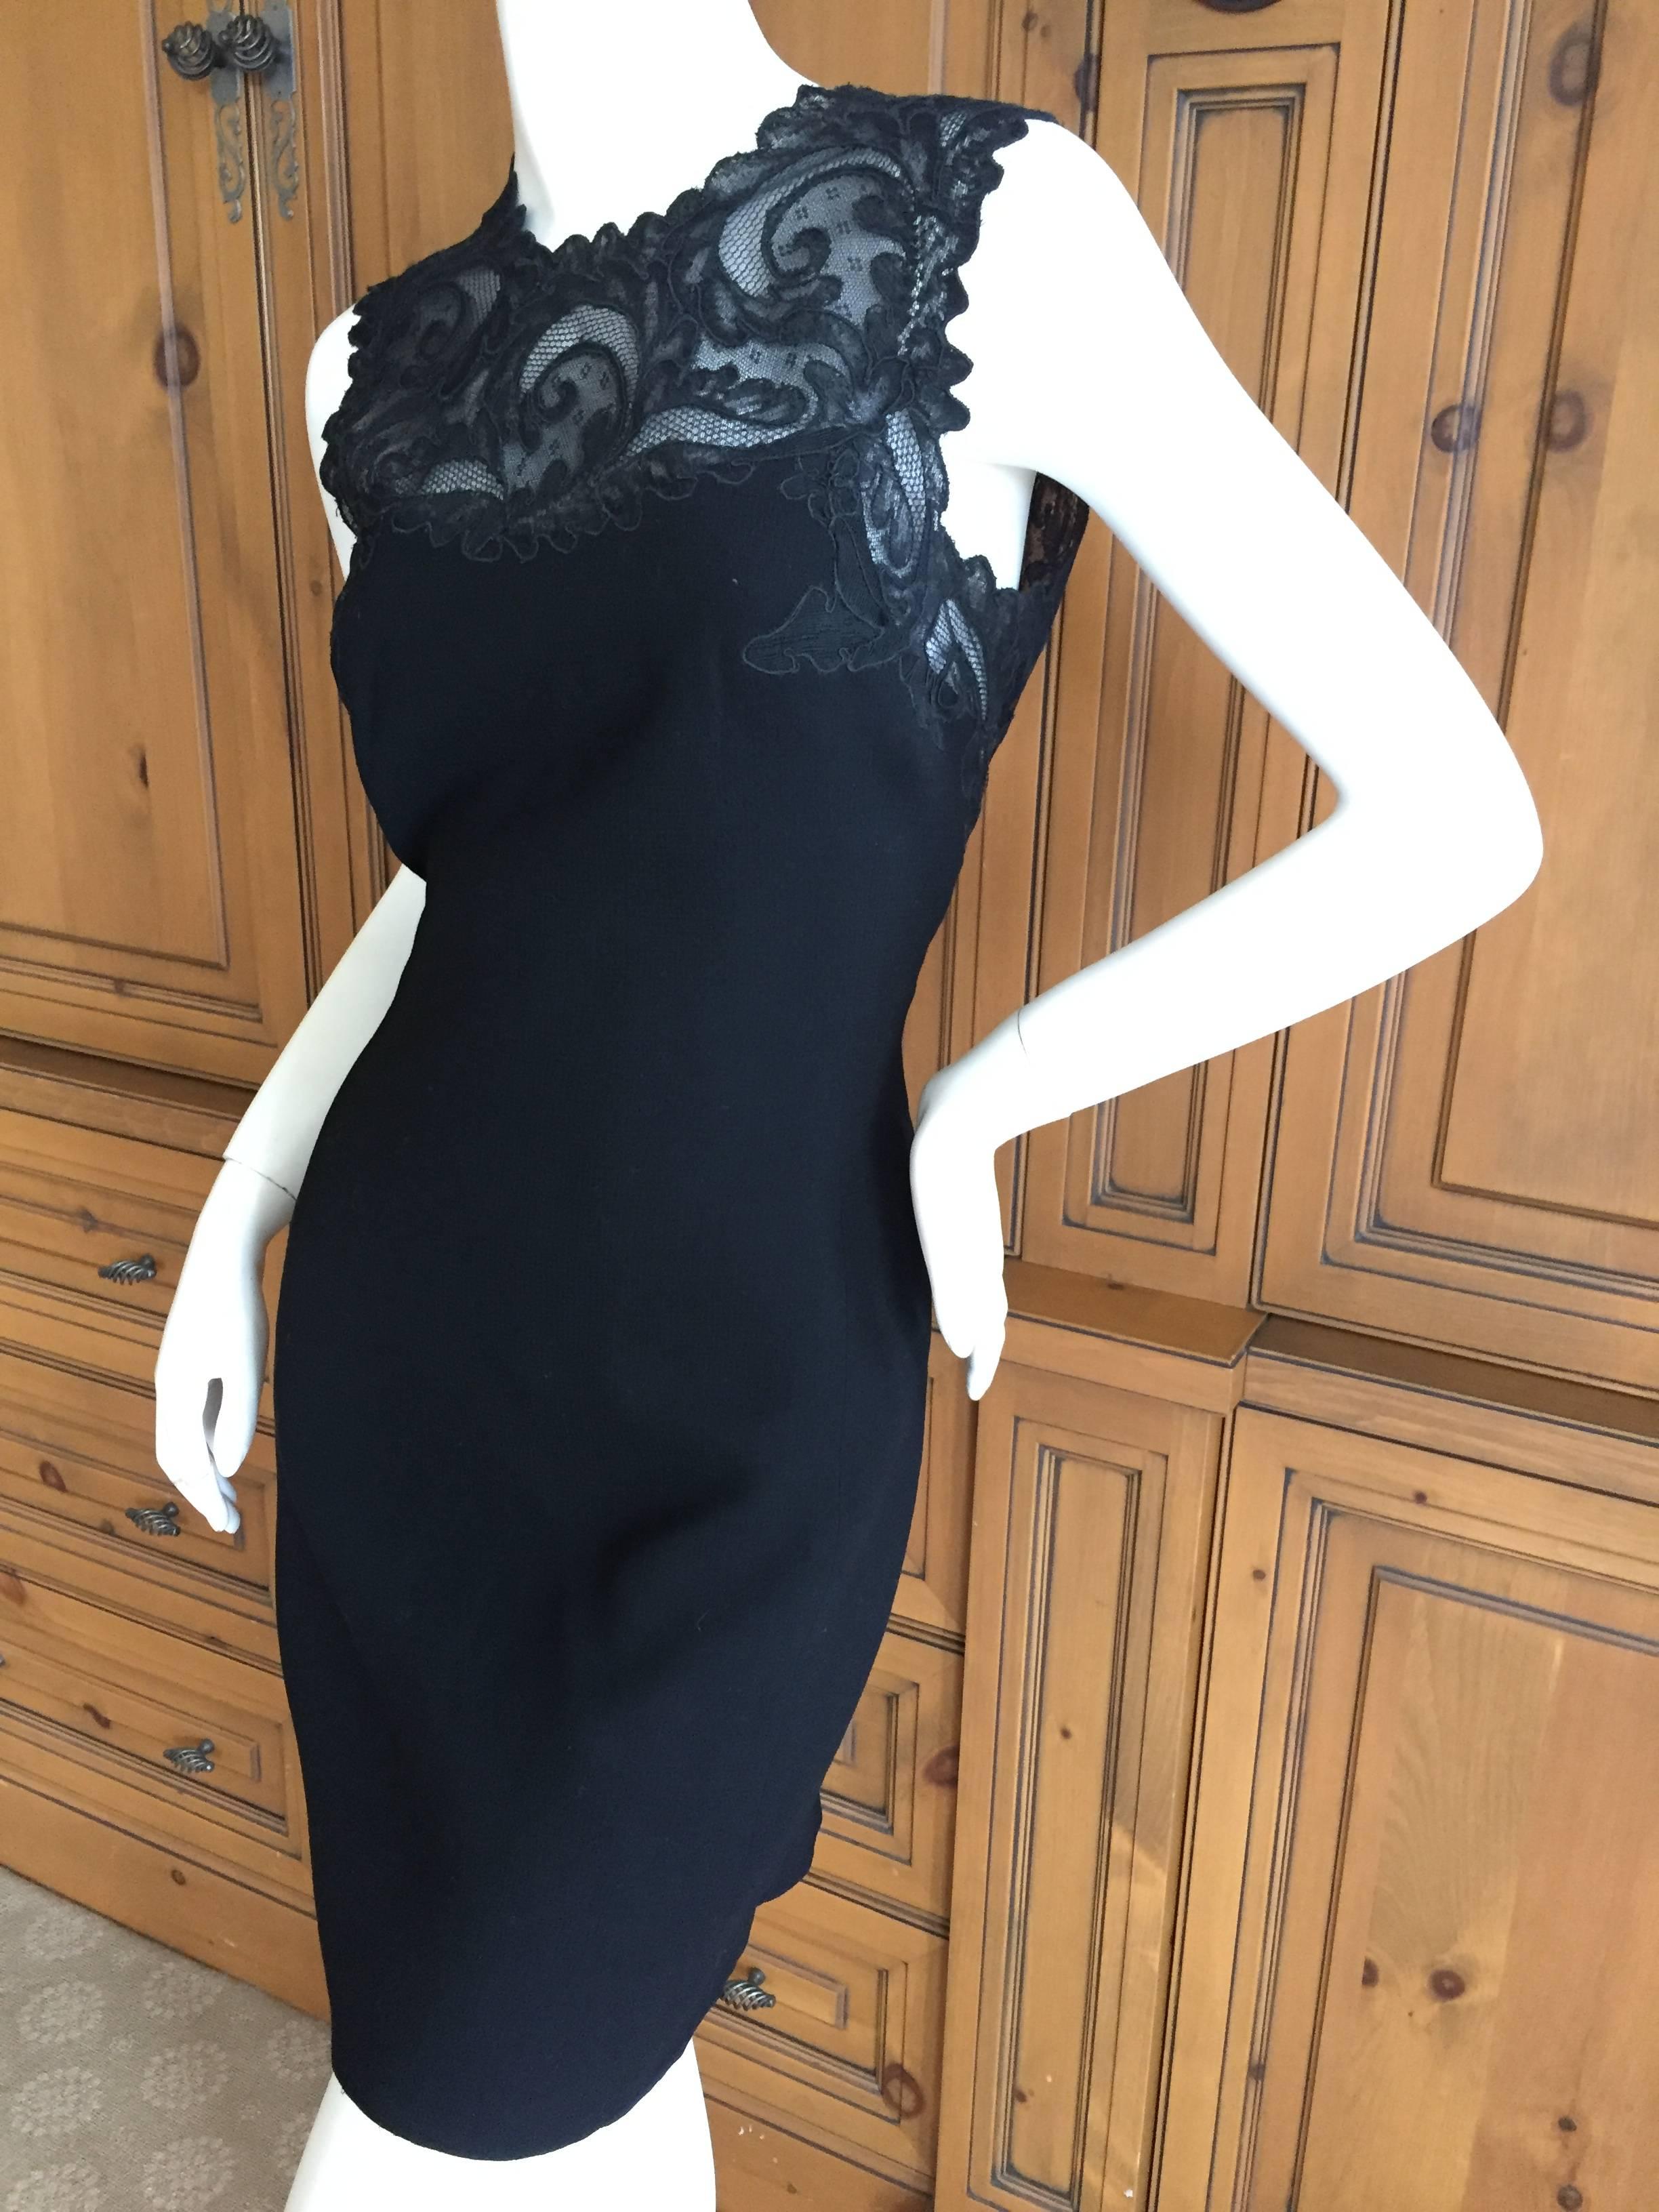 Gianni Versace Couture Lace Accented Little Black Dress.
Early Gianni Versace Couture silk lined wool dress with lace trim .
So pretty, photos don't quite capture it's charm.
Size 38

Bust 35